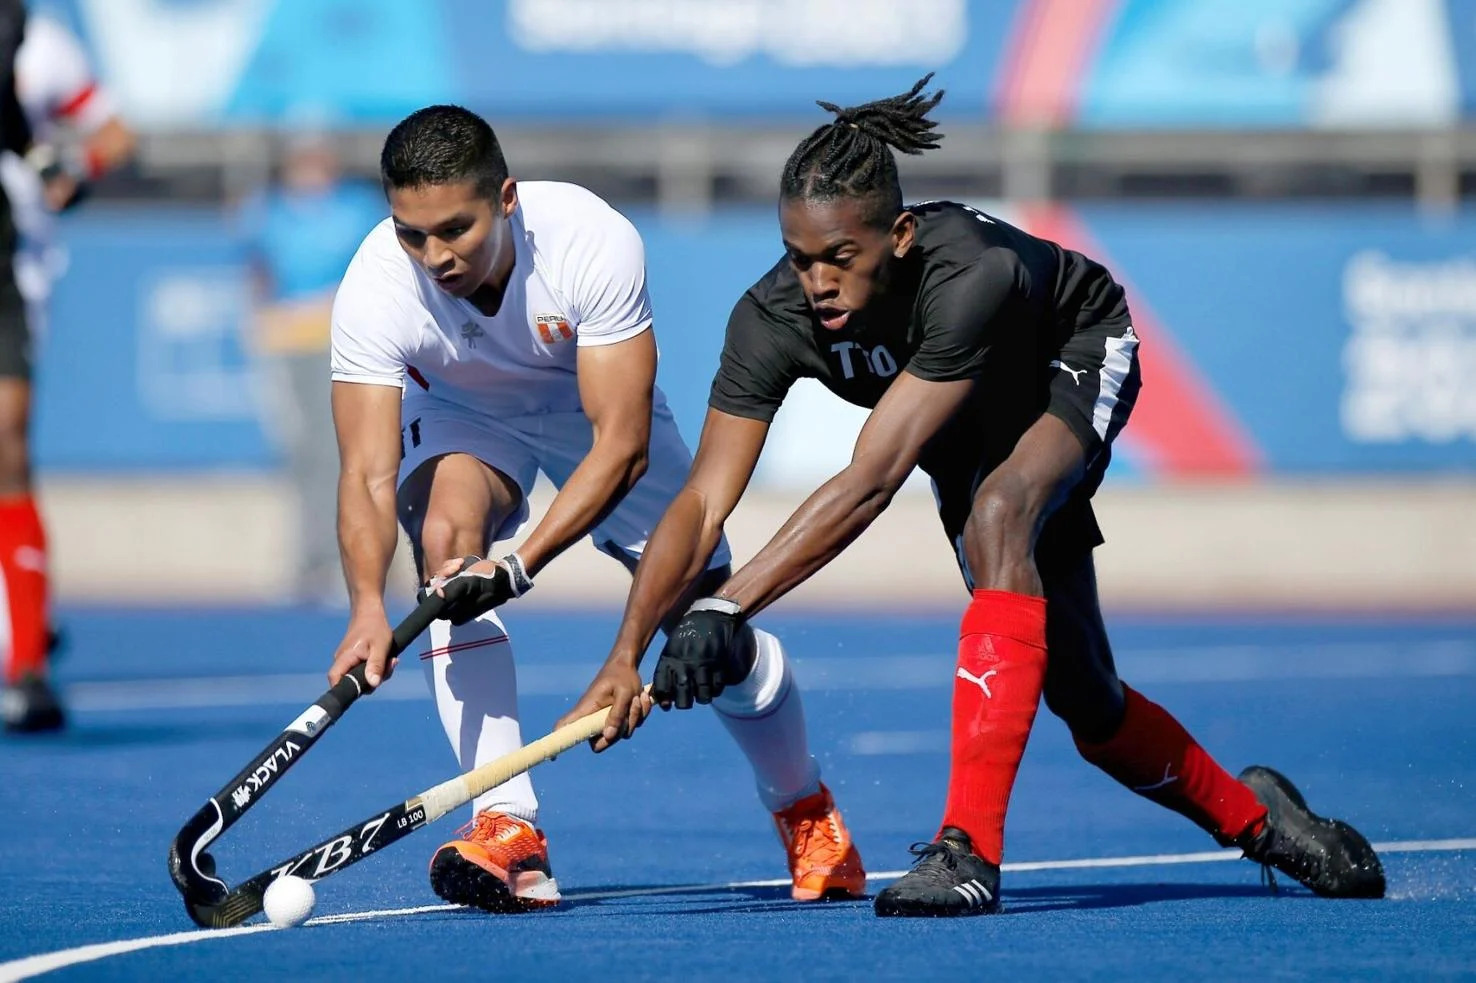 AT FULL STRETCH: TTO’s Teague Marcano, right, is tackled by Peru’s Jefferson Arcos during their 7th to 8th place playoff match at the Centro Deportivo de Hockey Césped yesterday. Marcano top-scored for TTO with six goals to help his team secure a 10-0 victory over Peru and finish in seventh place at the Santiago 2023 Pan American Games.—Photo: PHOTOSPORT / PANAM SPORTS (Image obtained at trinidadexpress.com)